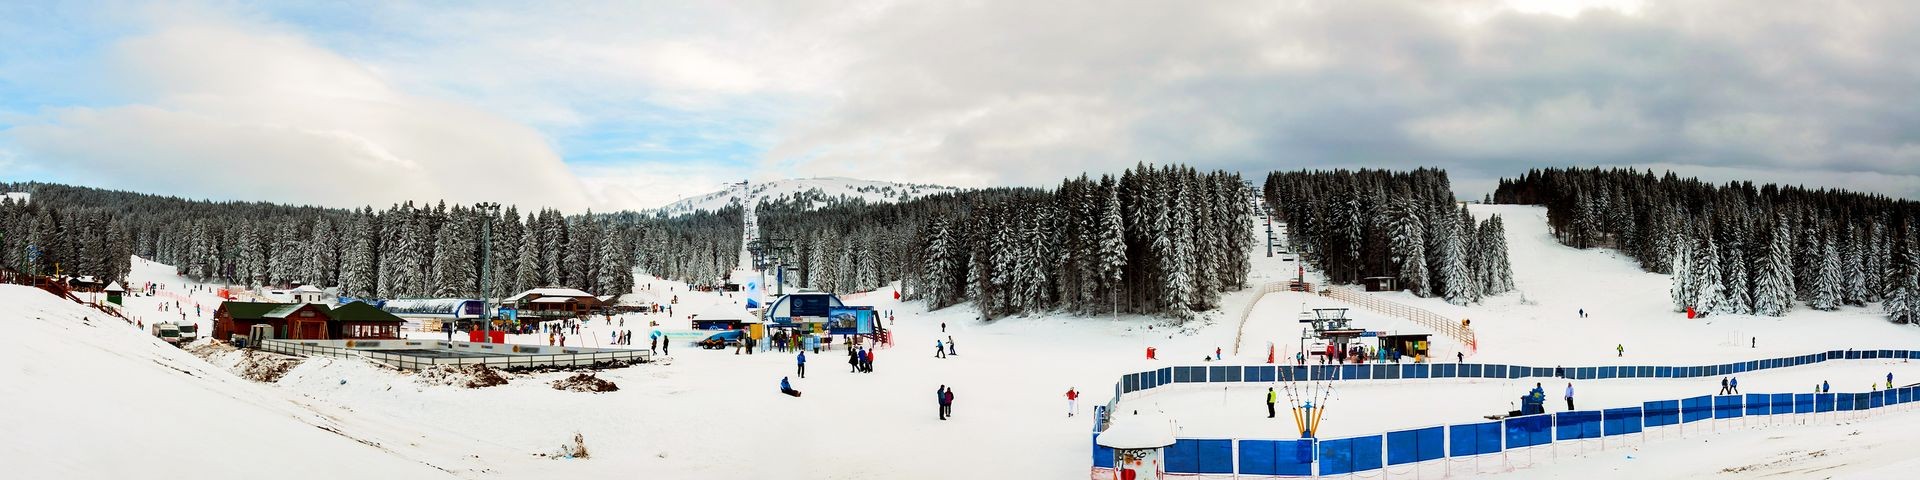 Kopaonik, Serbia. Slopes of winter touristic resort in Kopaonik - a largest mountain range in Serbia. It is a national park with beautiful pine forest and very popular ski center in the country